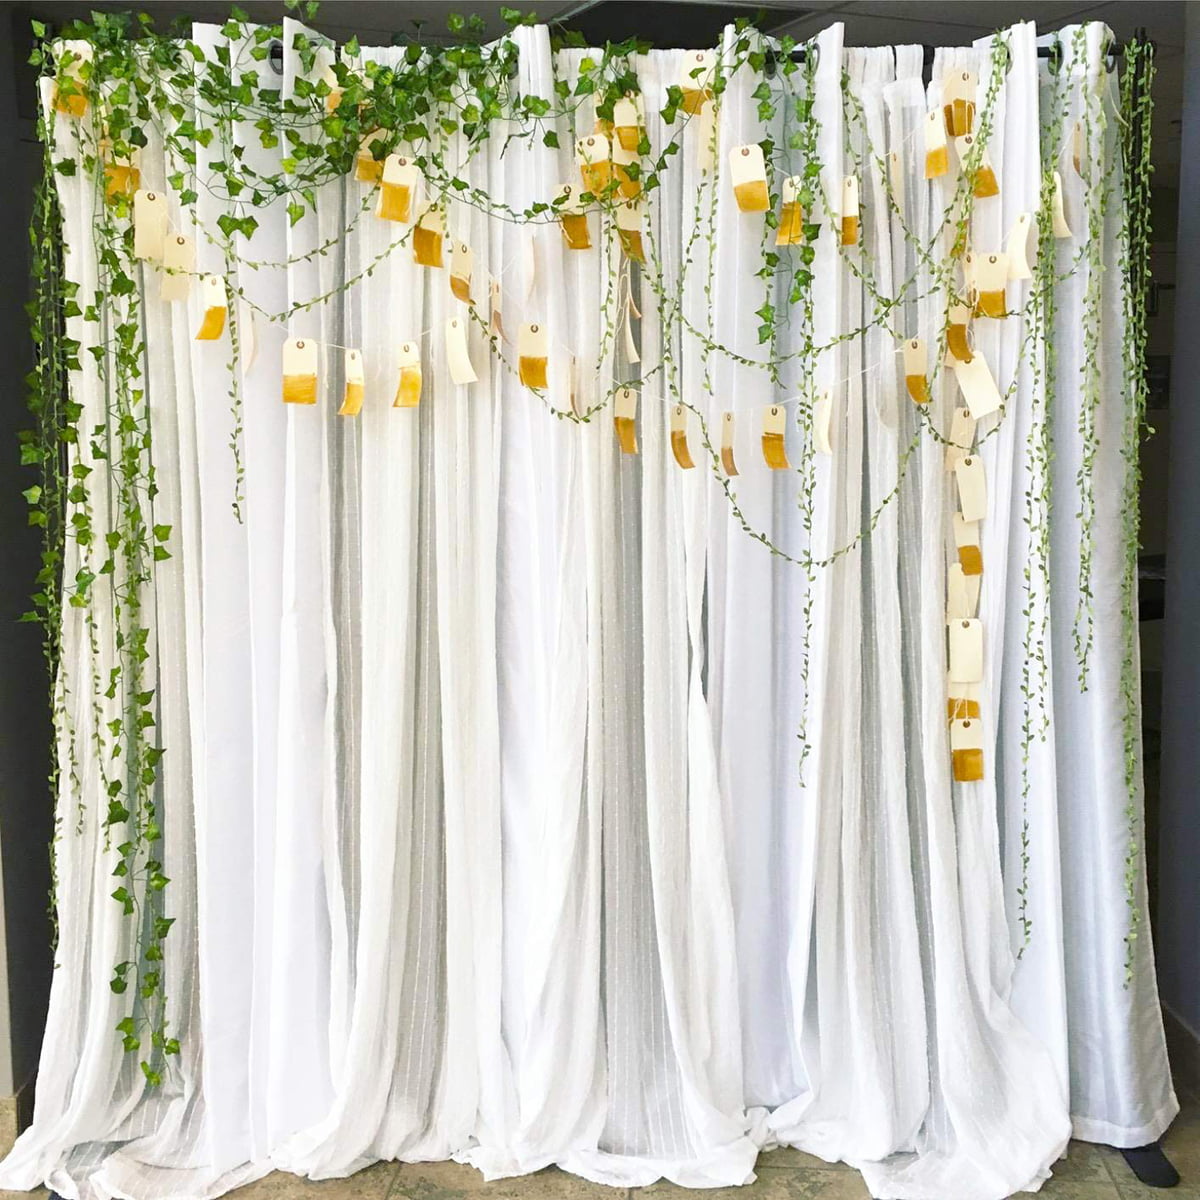 656 Ft Artificial Vine Green Leaves Hanging Garland Wedding Party Wall Decor US 